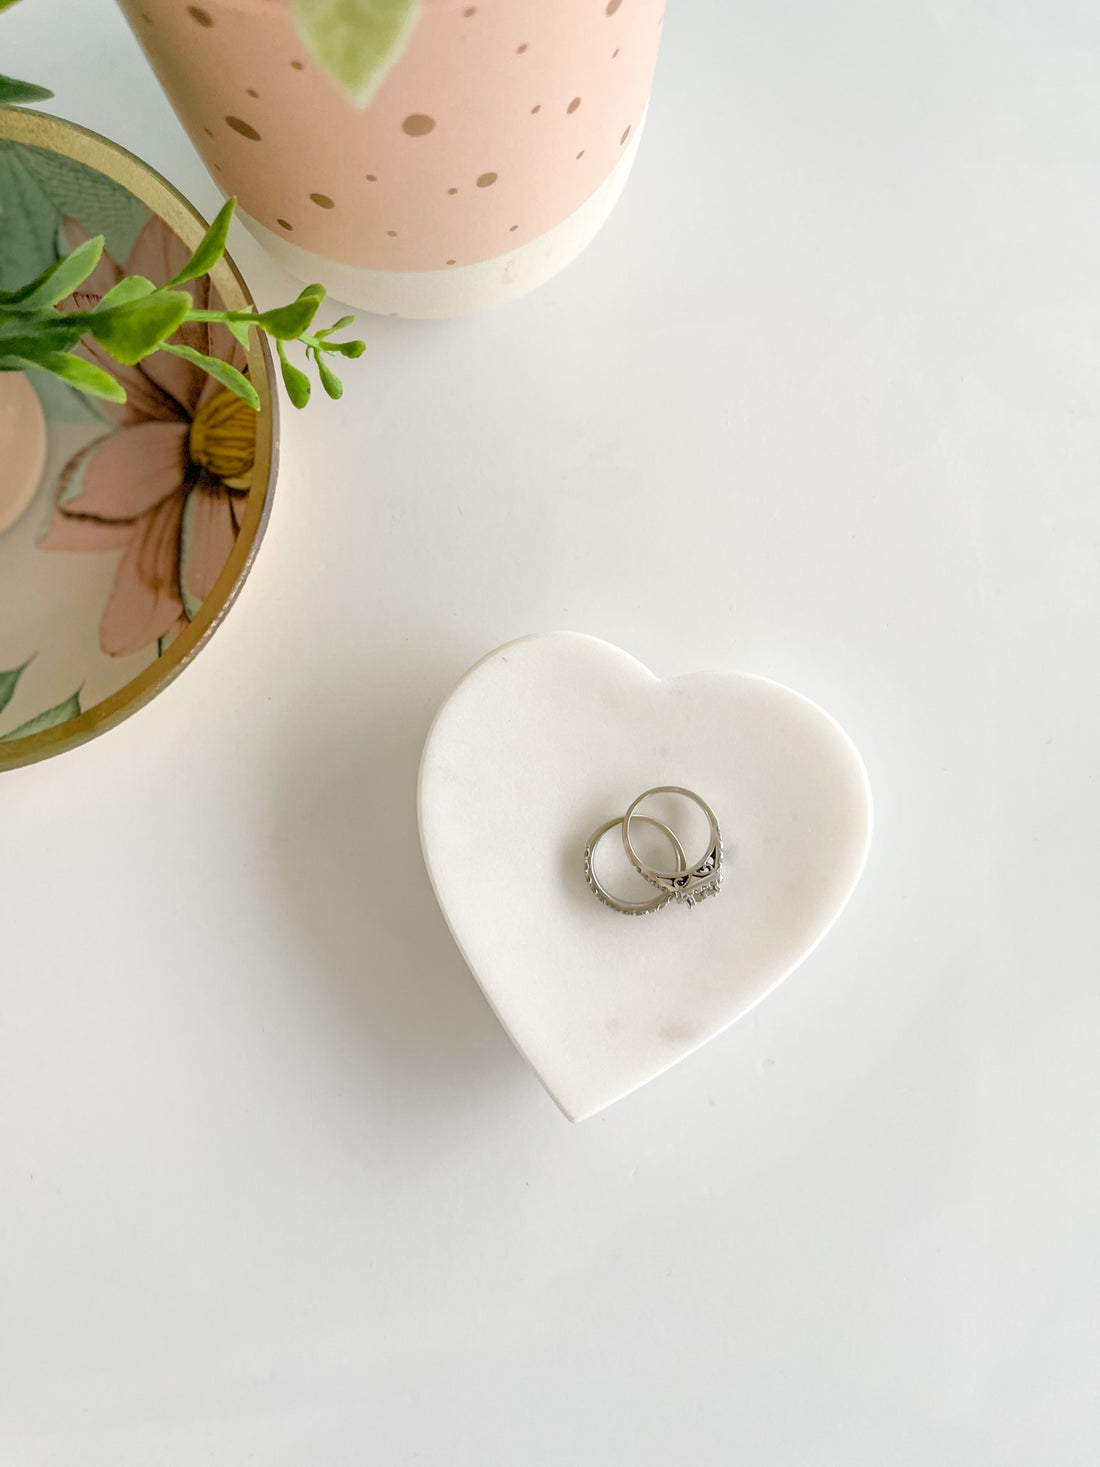 Heart Shaped Marble Ring Dish